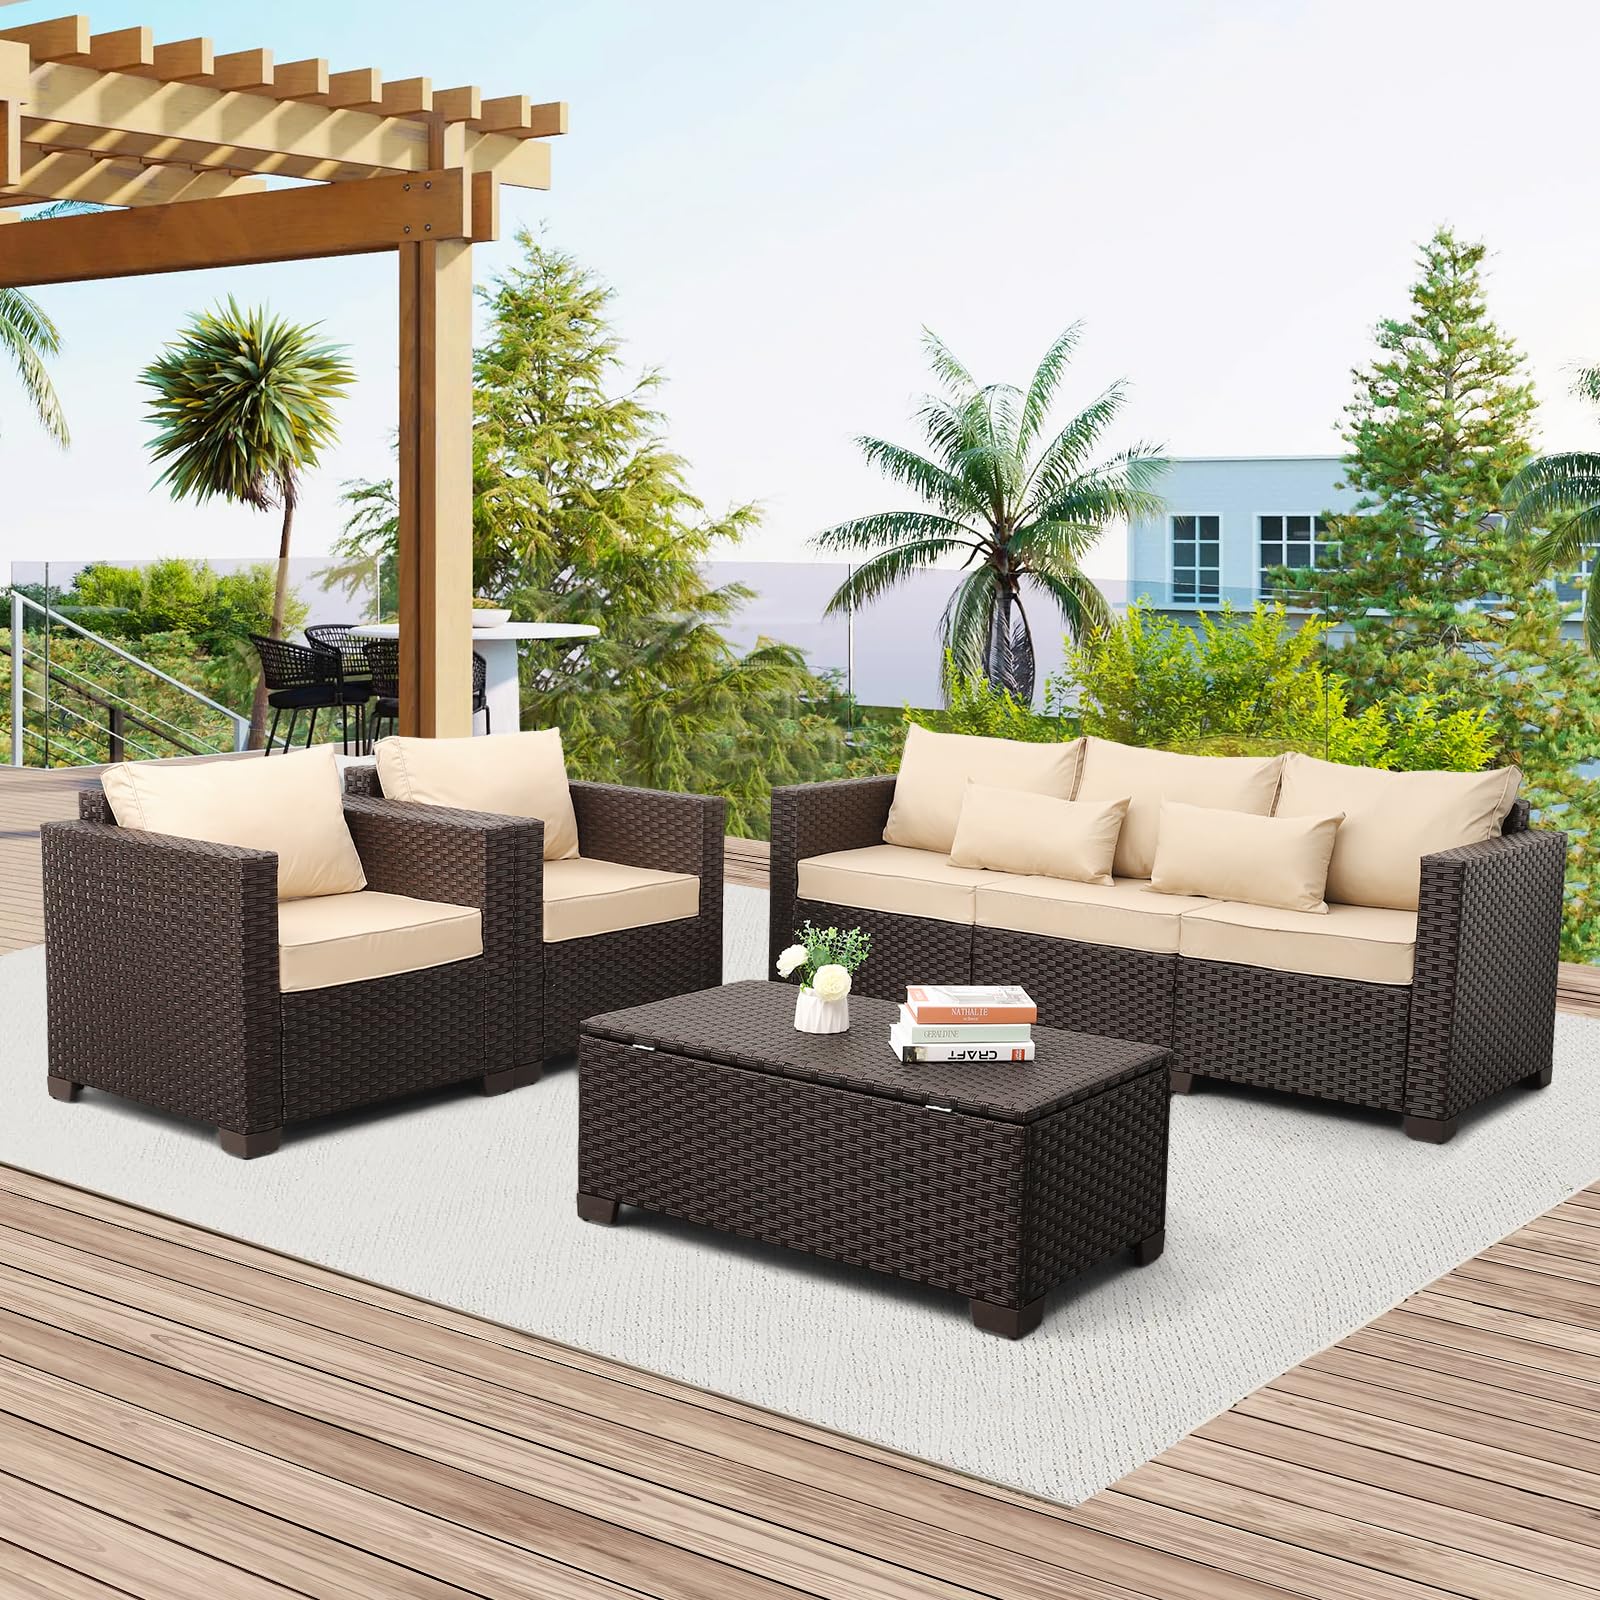 Patio Furniture Set 4 Pieces Outdoor Furniture Sets Patio Couch Outdoor Chairs Coffee